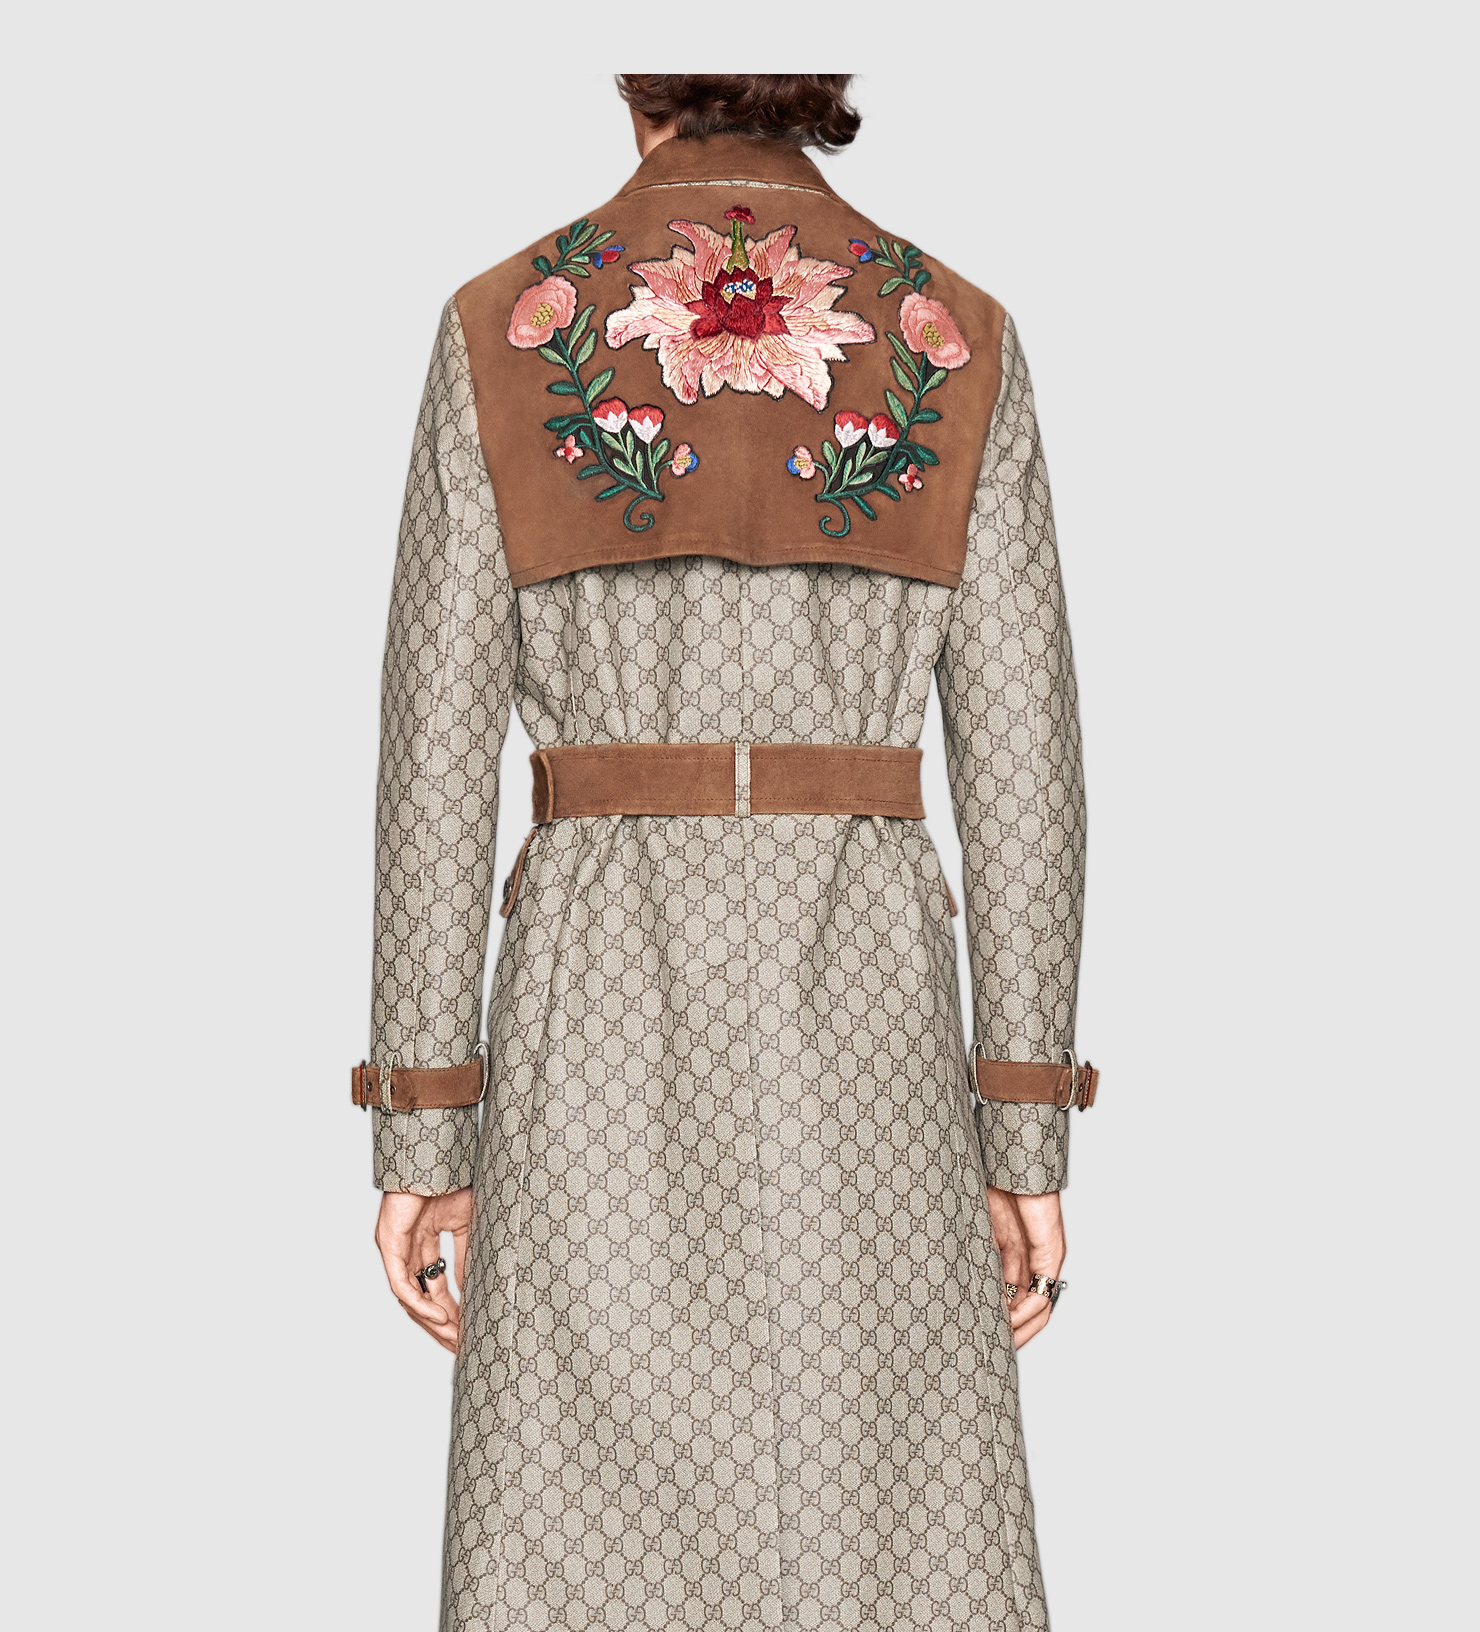 Lyst - Gucci Gg Supreme Trench Coat in Brown